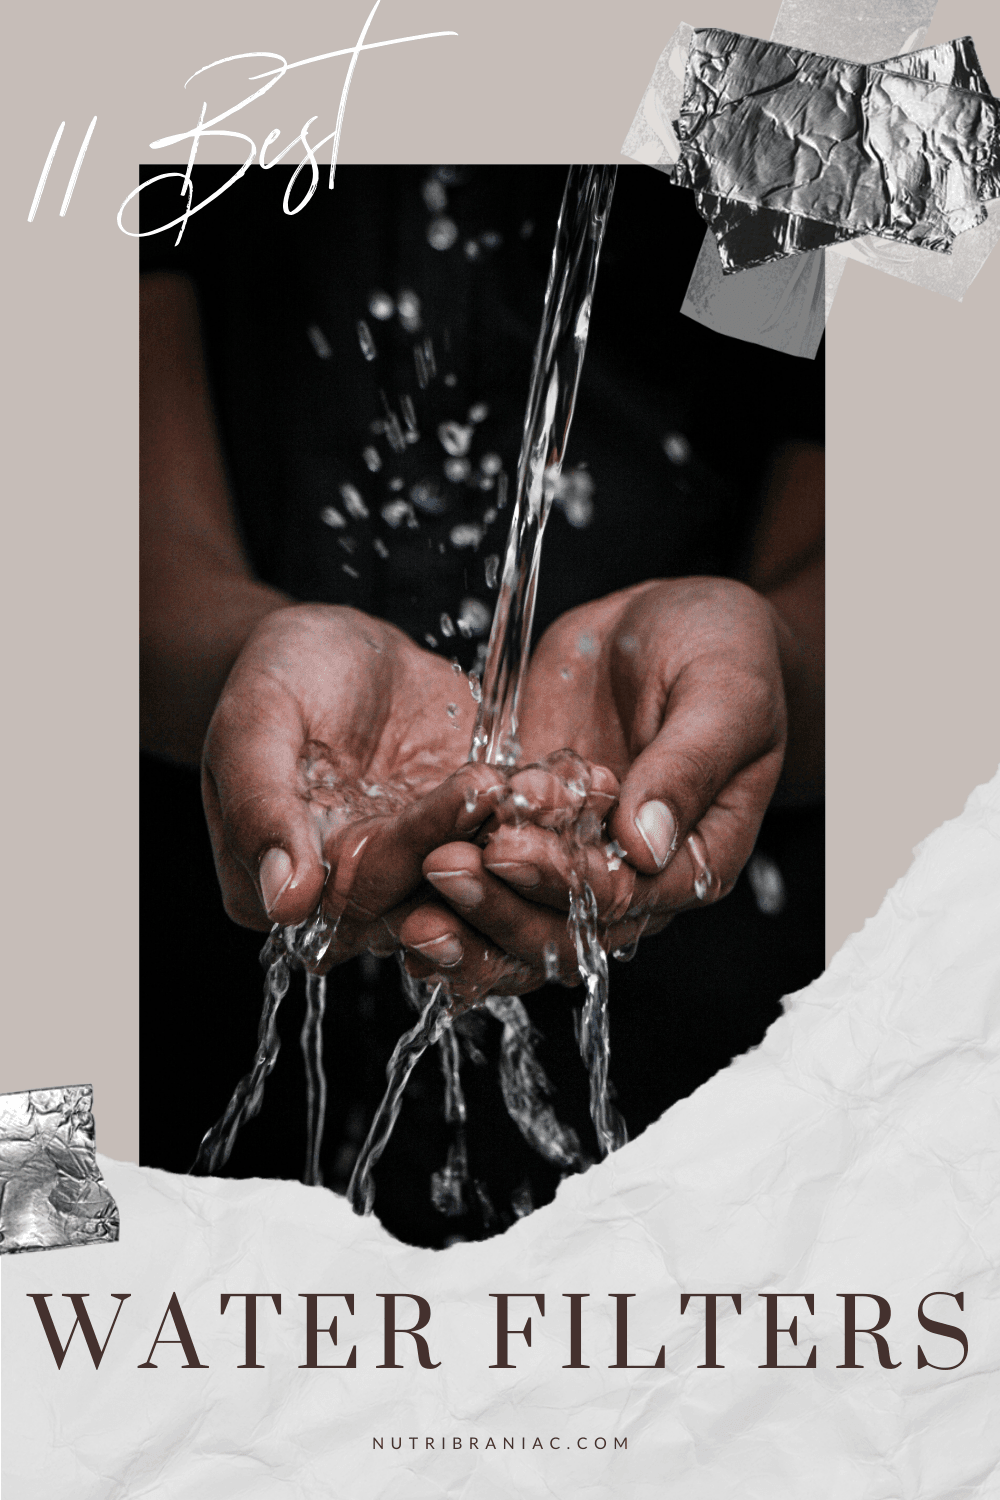 Image of a person washing hands under a stream of water with text overlay, "11 Best Water Filters"